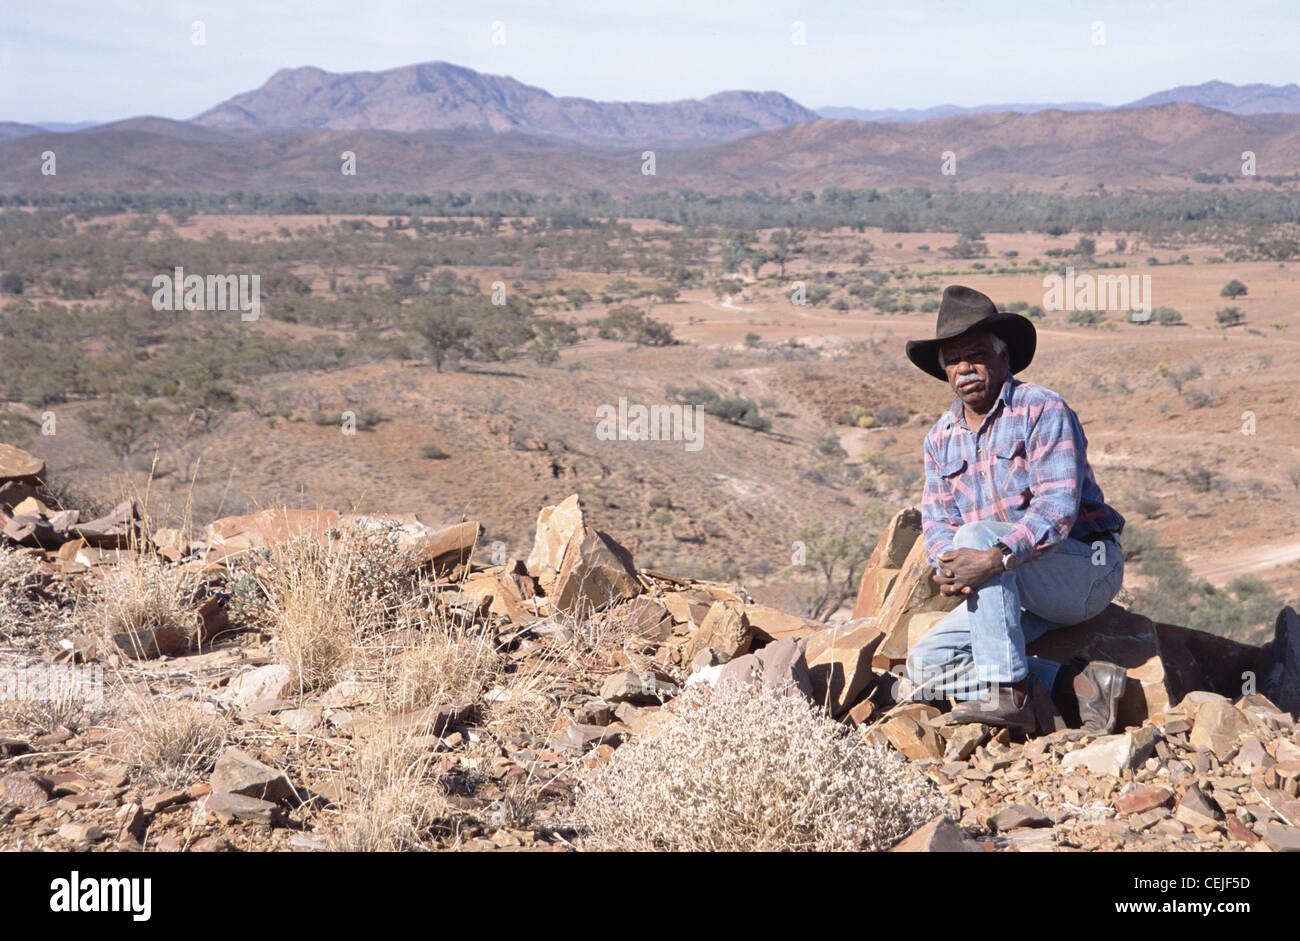 Aboriginal man sitting on a rock in the Flinders Ranges, South Australia Stock Photo